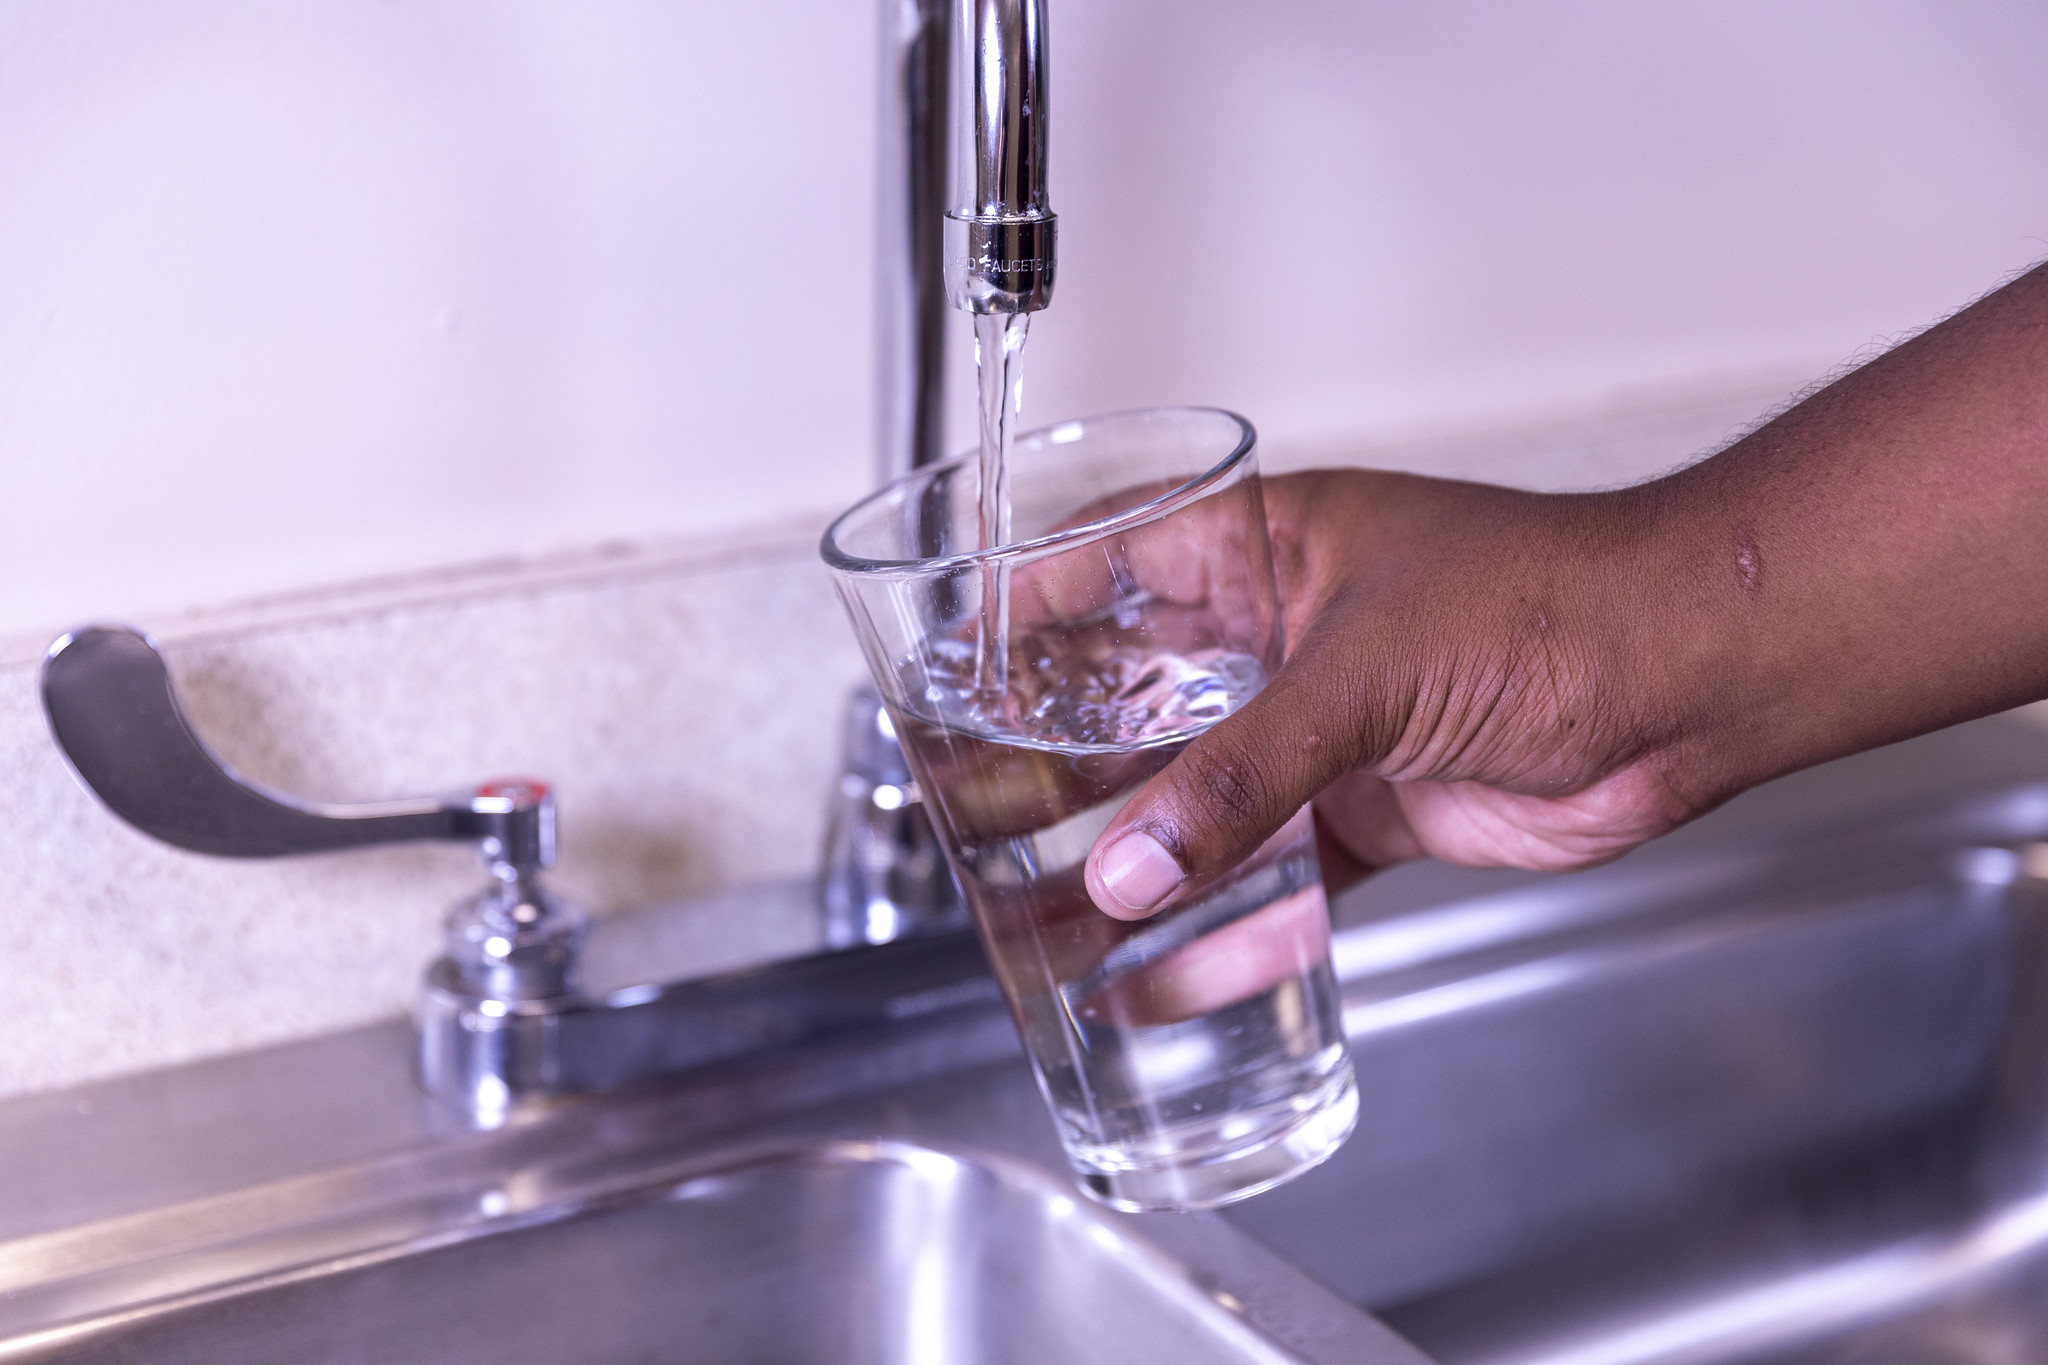 Health of Our State and Beyond Series: Access to Clean Water